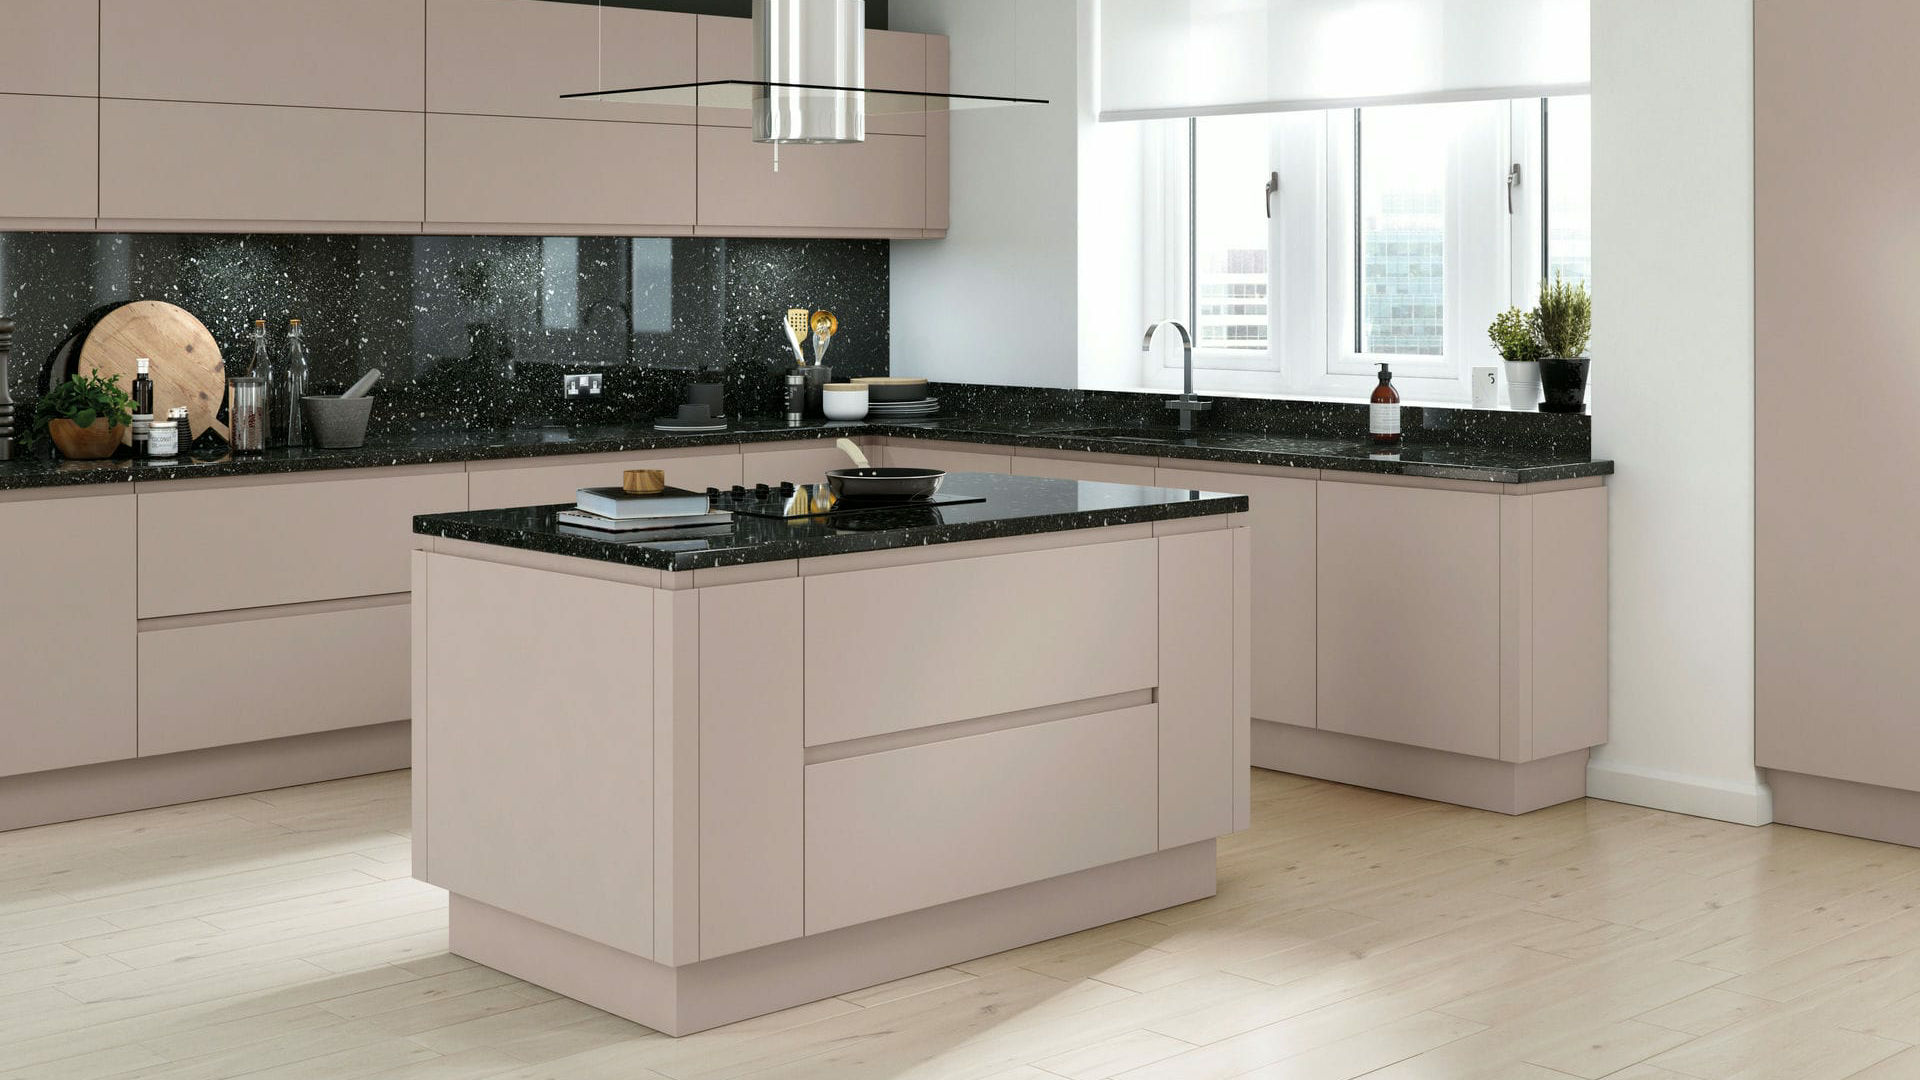 Handleless Matt Cashmere kitchen providing a seamless, understated style in a trendy, muted tone